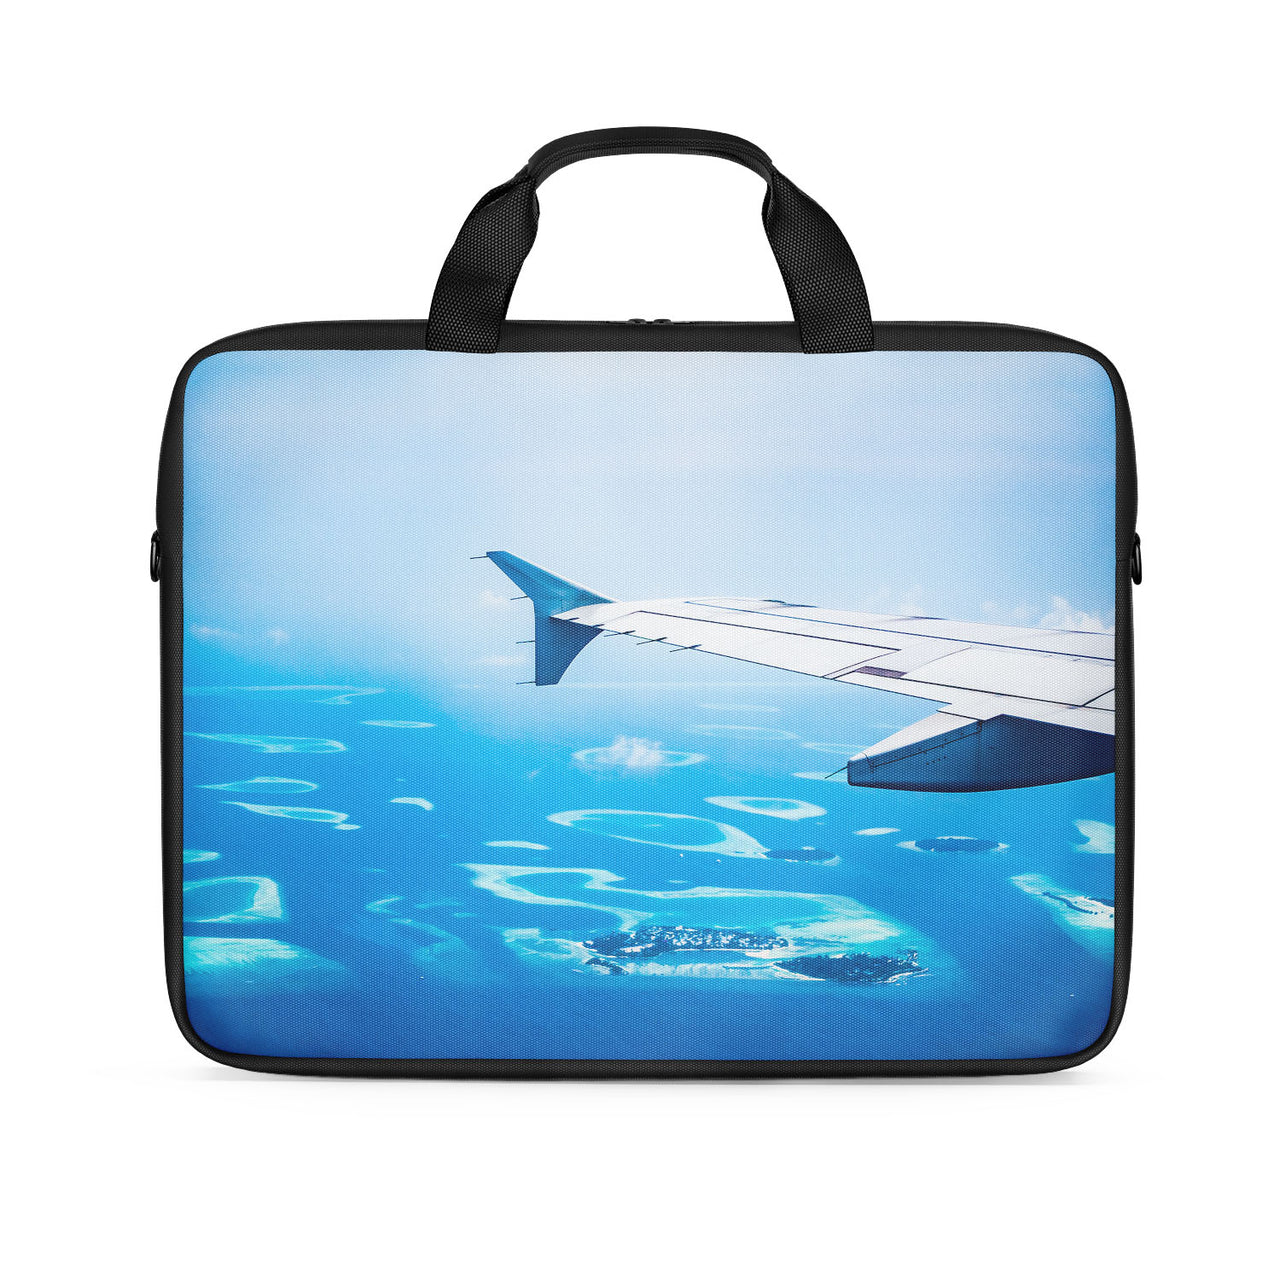 Outstanding View Through Airplane Wing Designed Laptop & Tablet Bags